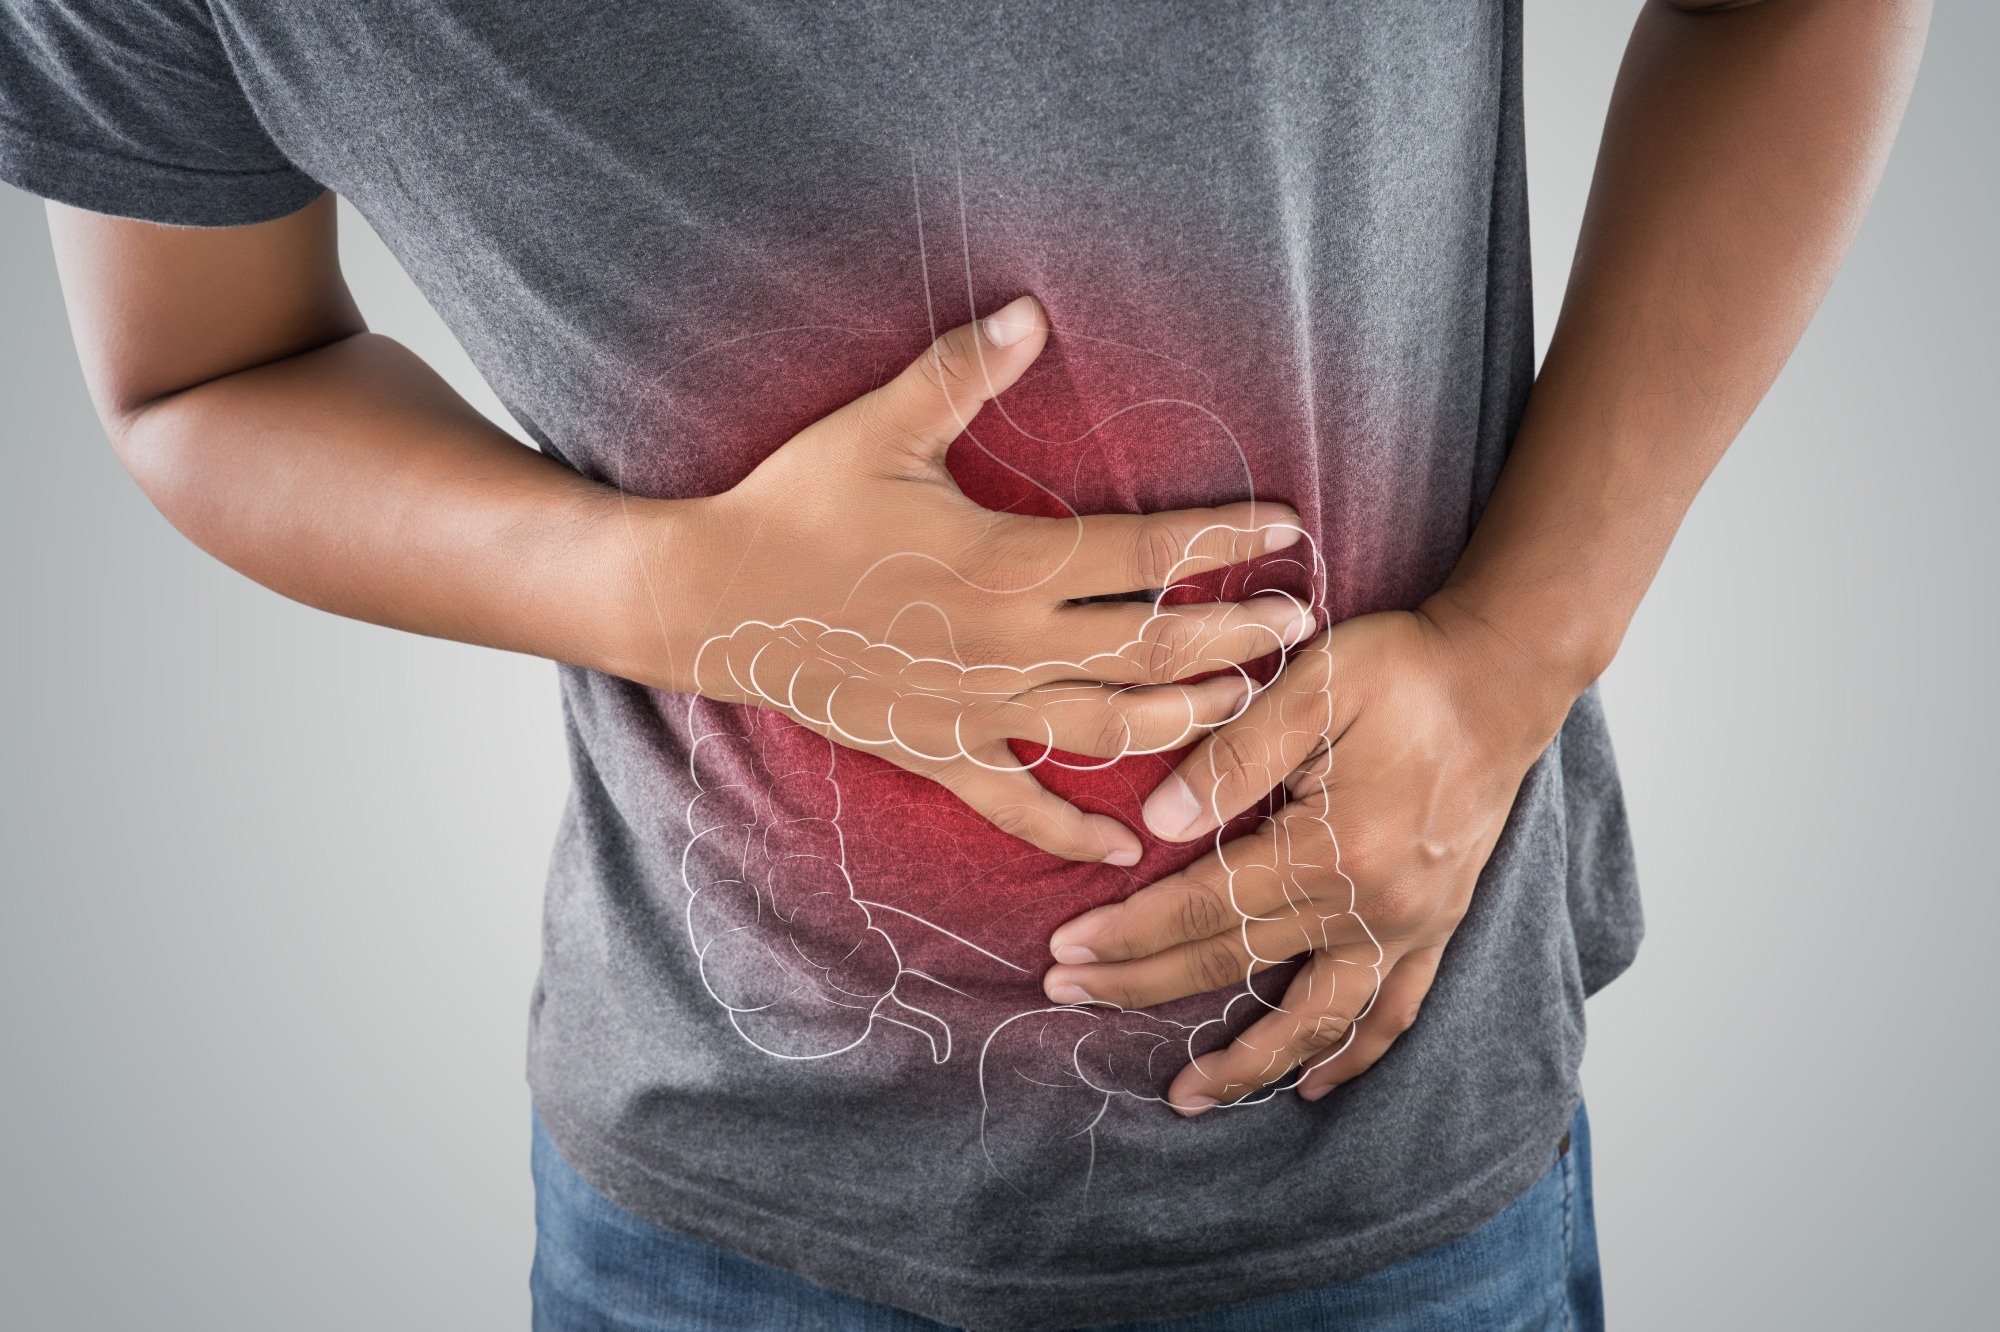 Study: Artificial Intelligence enabled histological prediction of remission or activity and clinical outcomes in ulcerative colitis. Image Credit: Emily frost/Shutterstock